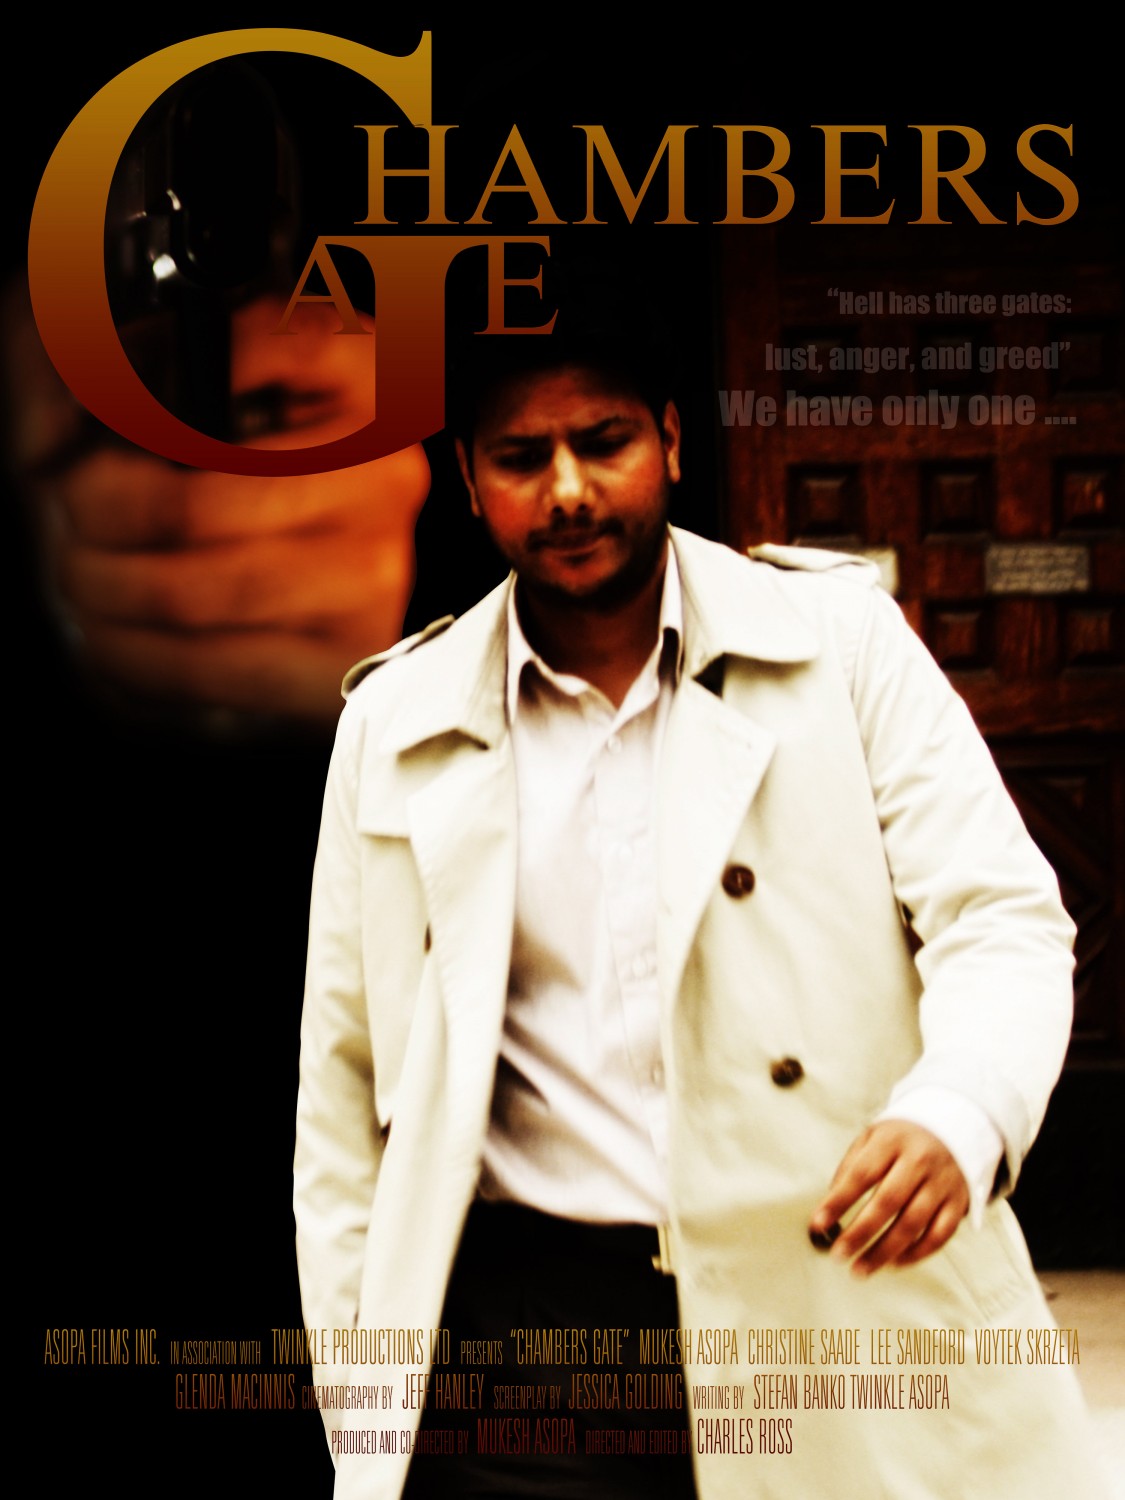 Extra Large Movie Poster Image for Chambers Gate 